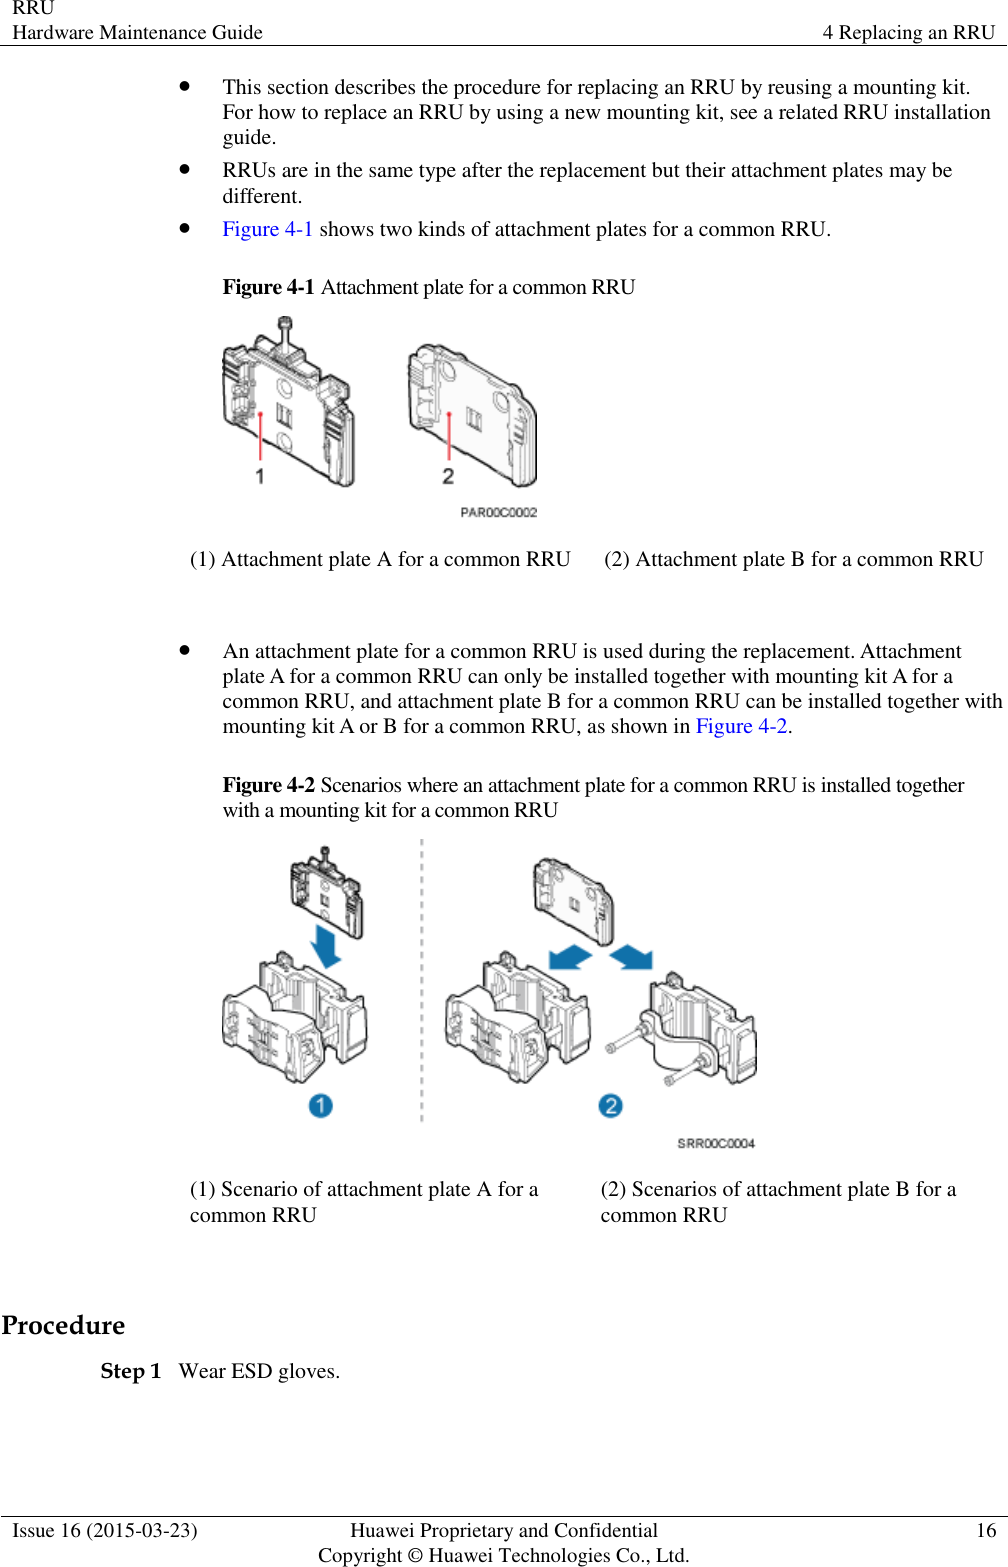 RRU Hardware Maintenance Guide 4 Replacing an RRU  Issue 16 (2015-03-23) Huawei Proprietary and Confidential                                     Copyright © Huawei Technologies Co., Ltd. 16   This section describes the procedure for replacing an RRU by reusing a mounting kit. For how to replace an RRU by using a new mounting kit, see a related RRU installation guide.  RRUs are in the same type after the replacement but their attachment plates may be different.  Figure 4-1 shows two kinds of attachment plates for a common RRU. Figure 4-1 Attachment plate for a common RRU  (1) Attachment plate A for a common RRU (2) Attachment plate B for a common RRU   An attachment plate for a common RRU is used during the replacement. Attachment plate A for a common RRU can only be installed together with mounting kit A for a common RRU, and attachment plate B for a common RRU can be installed together with mounting kit A or B for a common RRU, as shown in Figure 4-2. Figure 4-2 Scenarios where an attachment plate for a common RRU is installed together with a mounting kit for a common RRU  (1) Scenario of attachment plate A for a common RRU (2) Scenarios of attachment plate B for a common RRU  Procedure Step 1 Wear ESD gloves.  